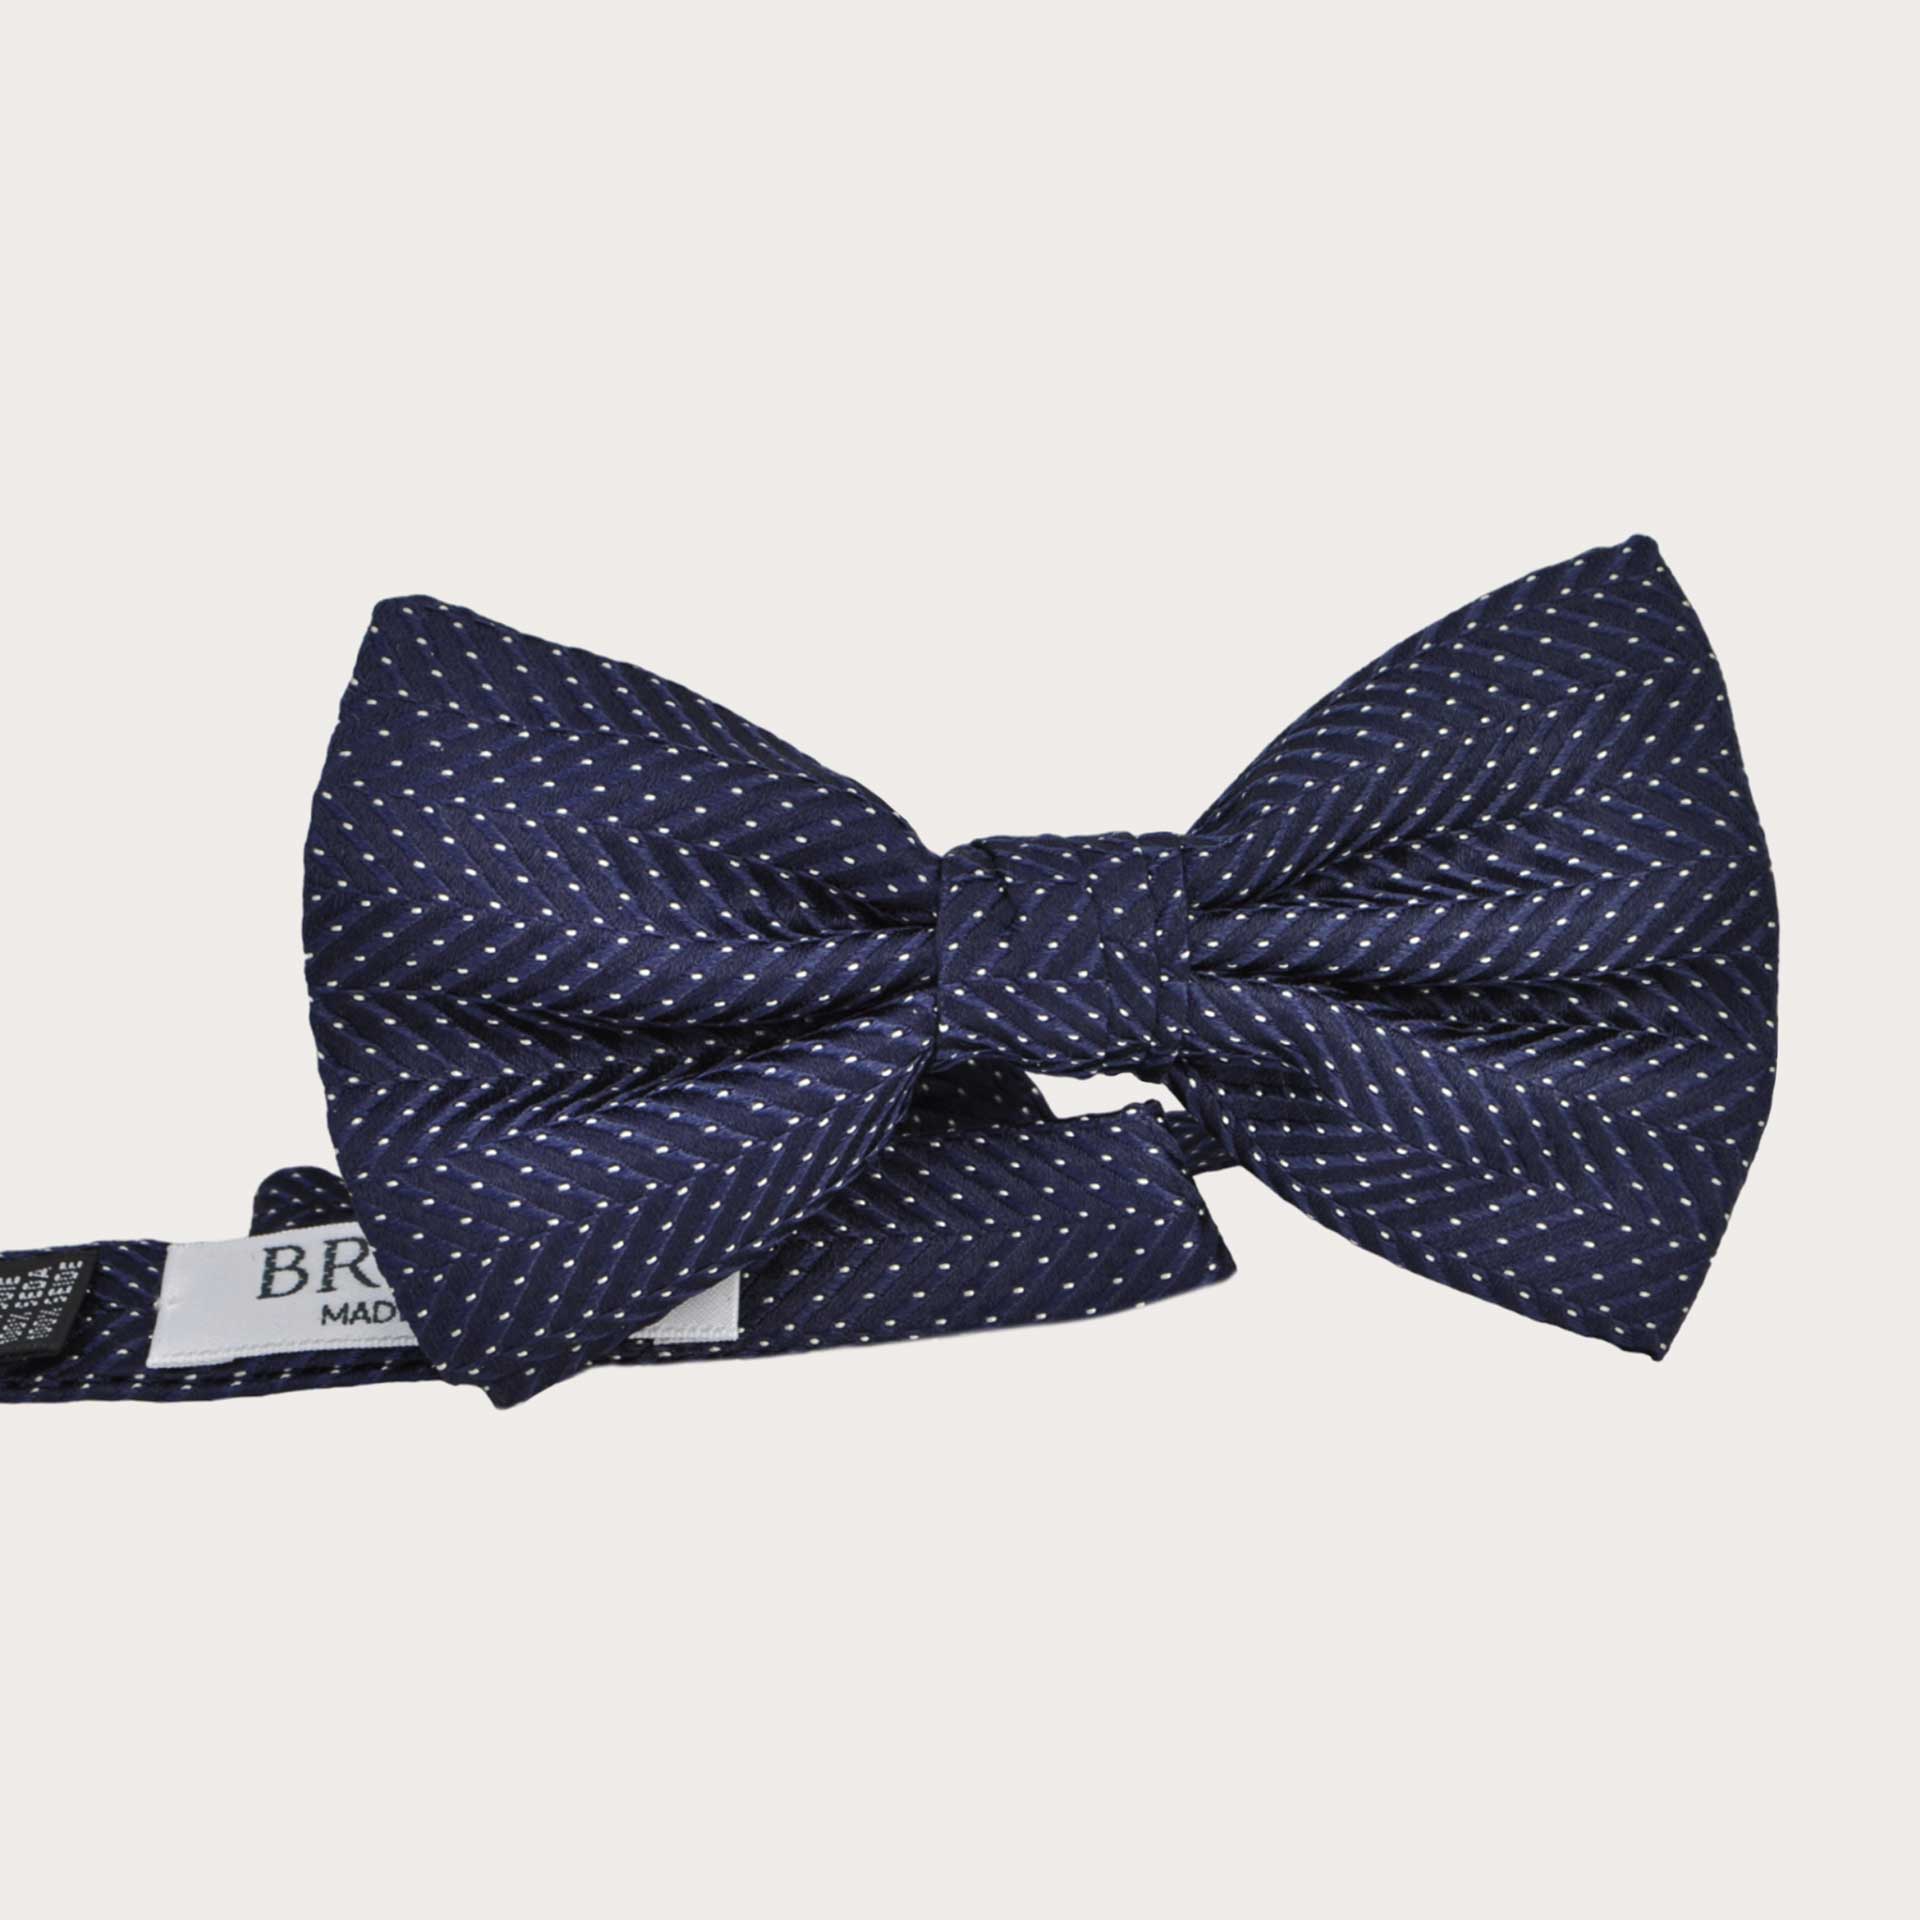 BRUCLE Silk pre-tied bow tie, blue navy with dotted pattern